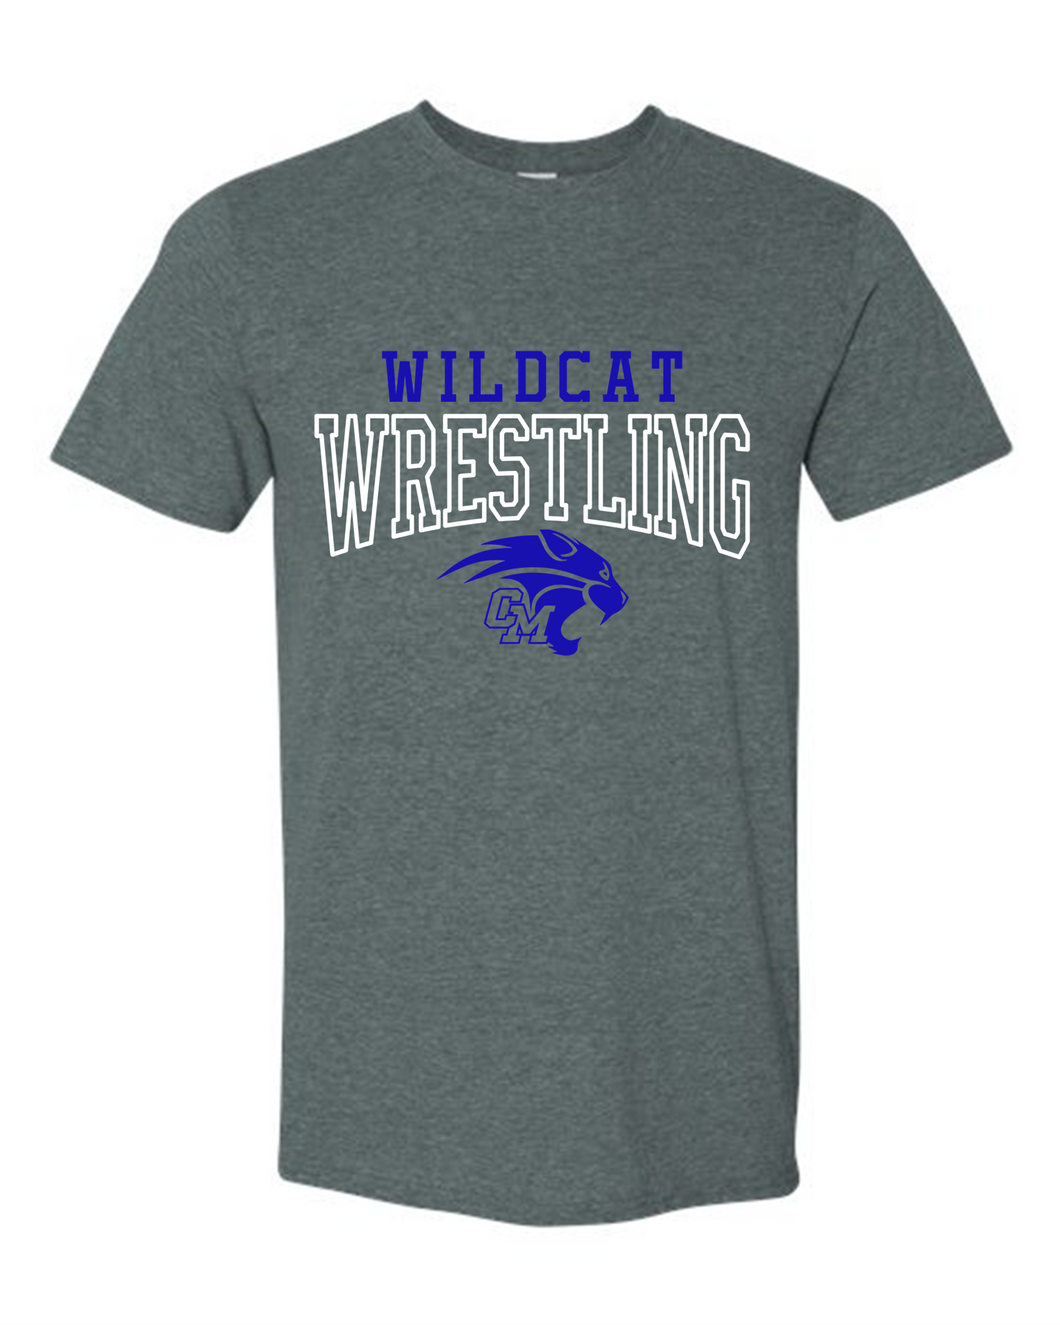 Central Mountain Wildcats Wrestling Style 6 - Click for Additional Styles (Youth and Adult)